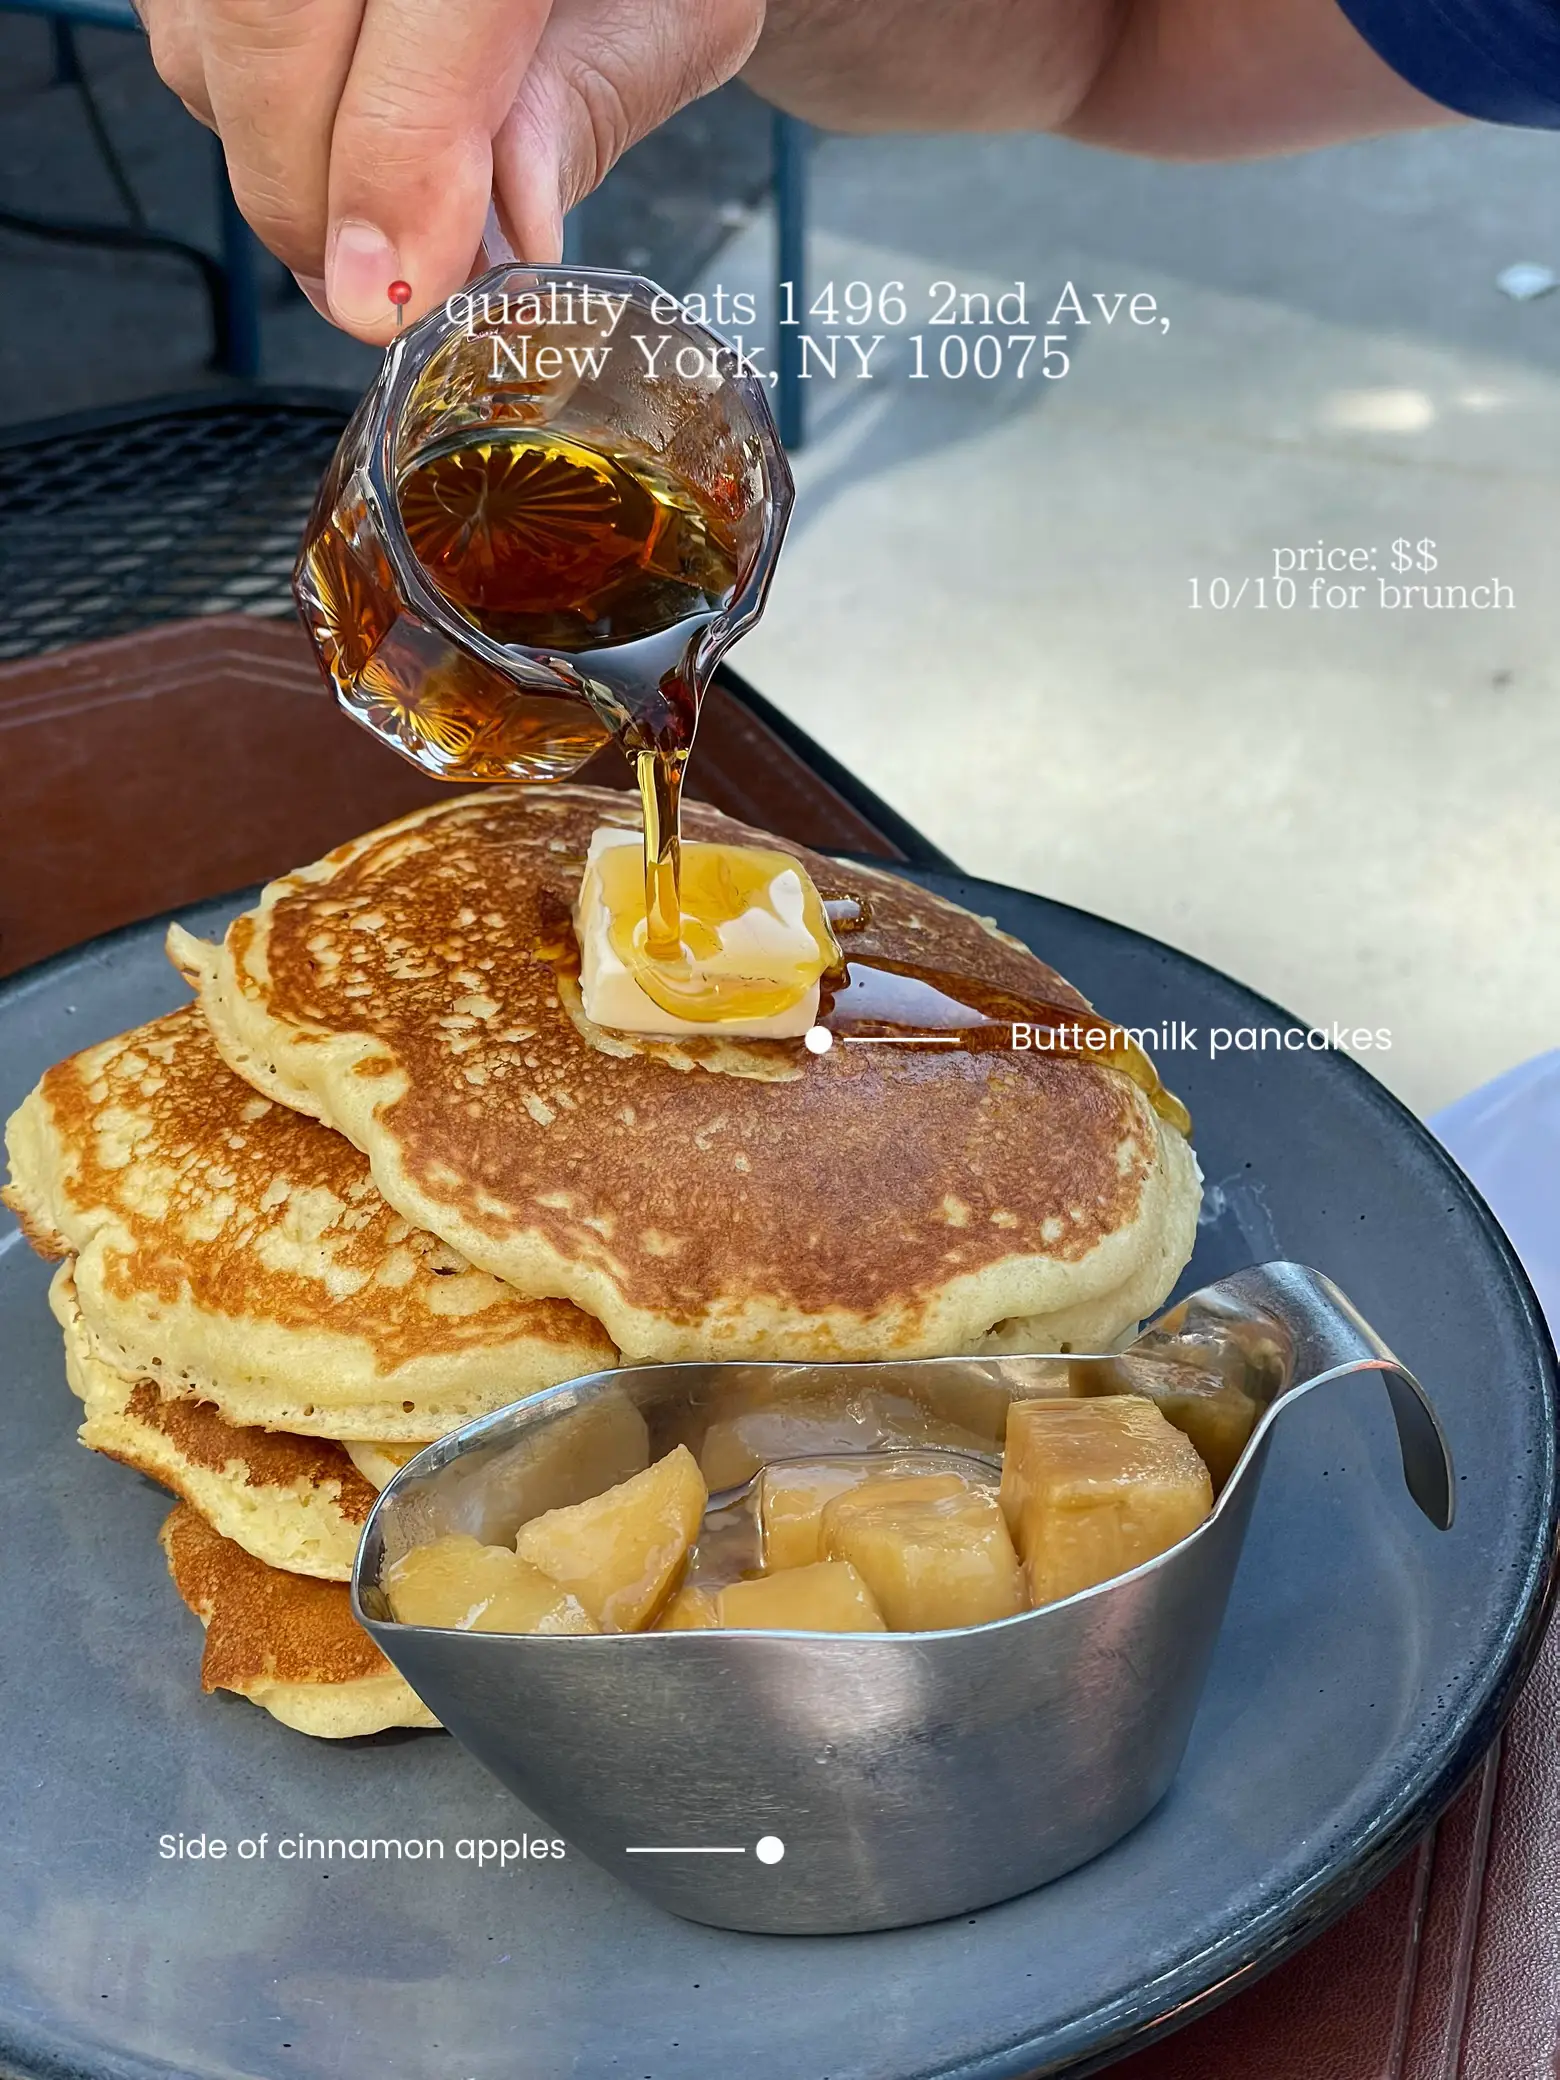  A plate of pancakes with syrup and a side of cinnamon apples.